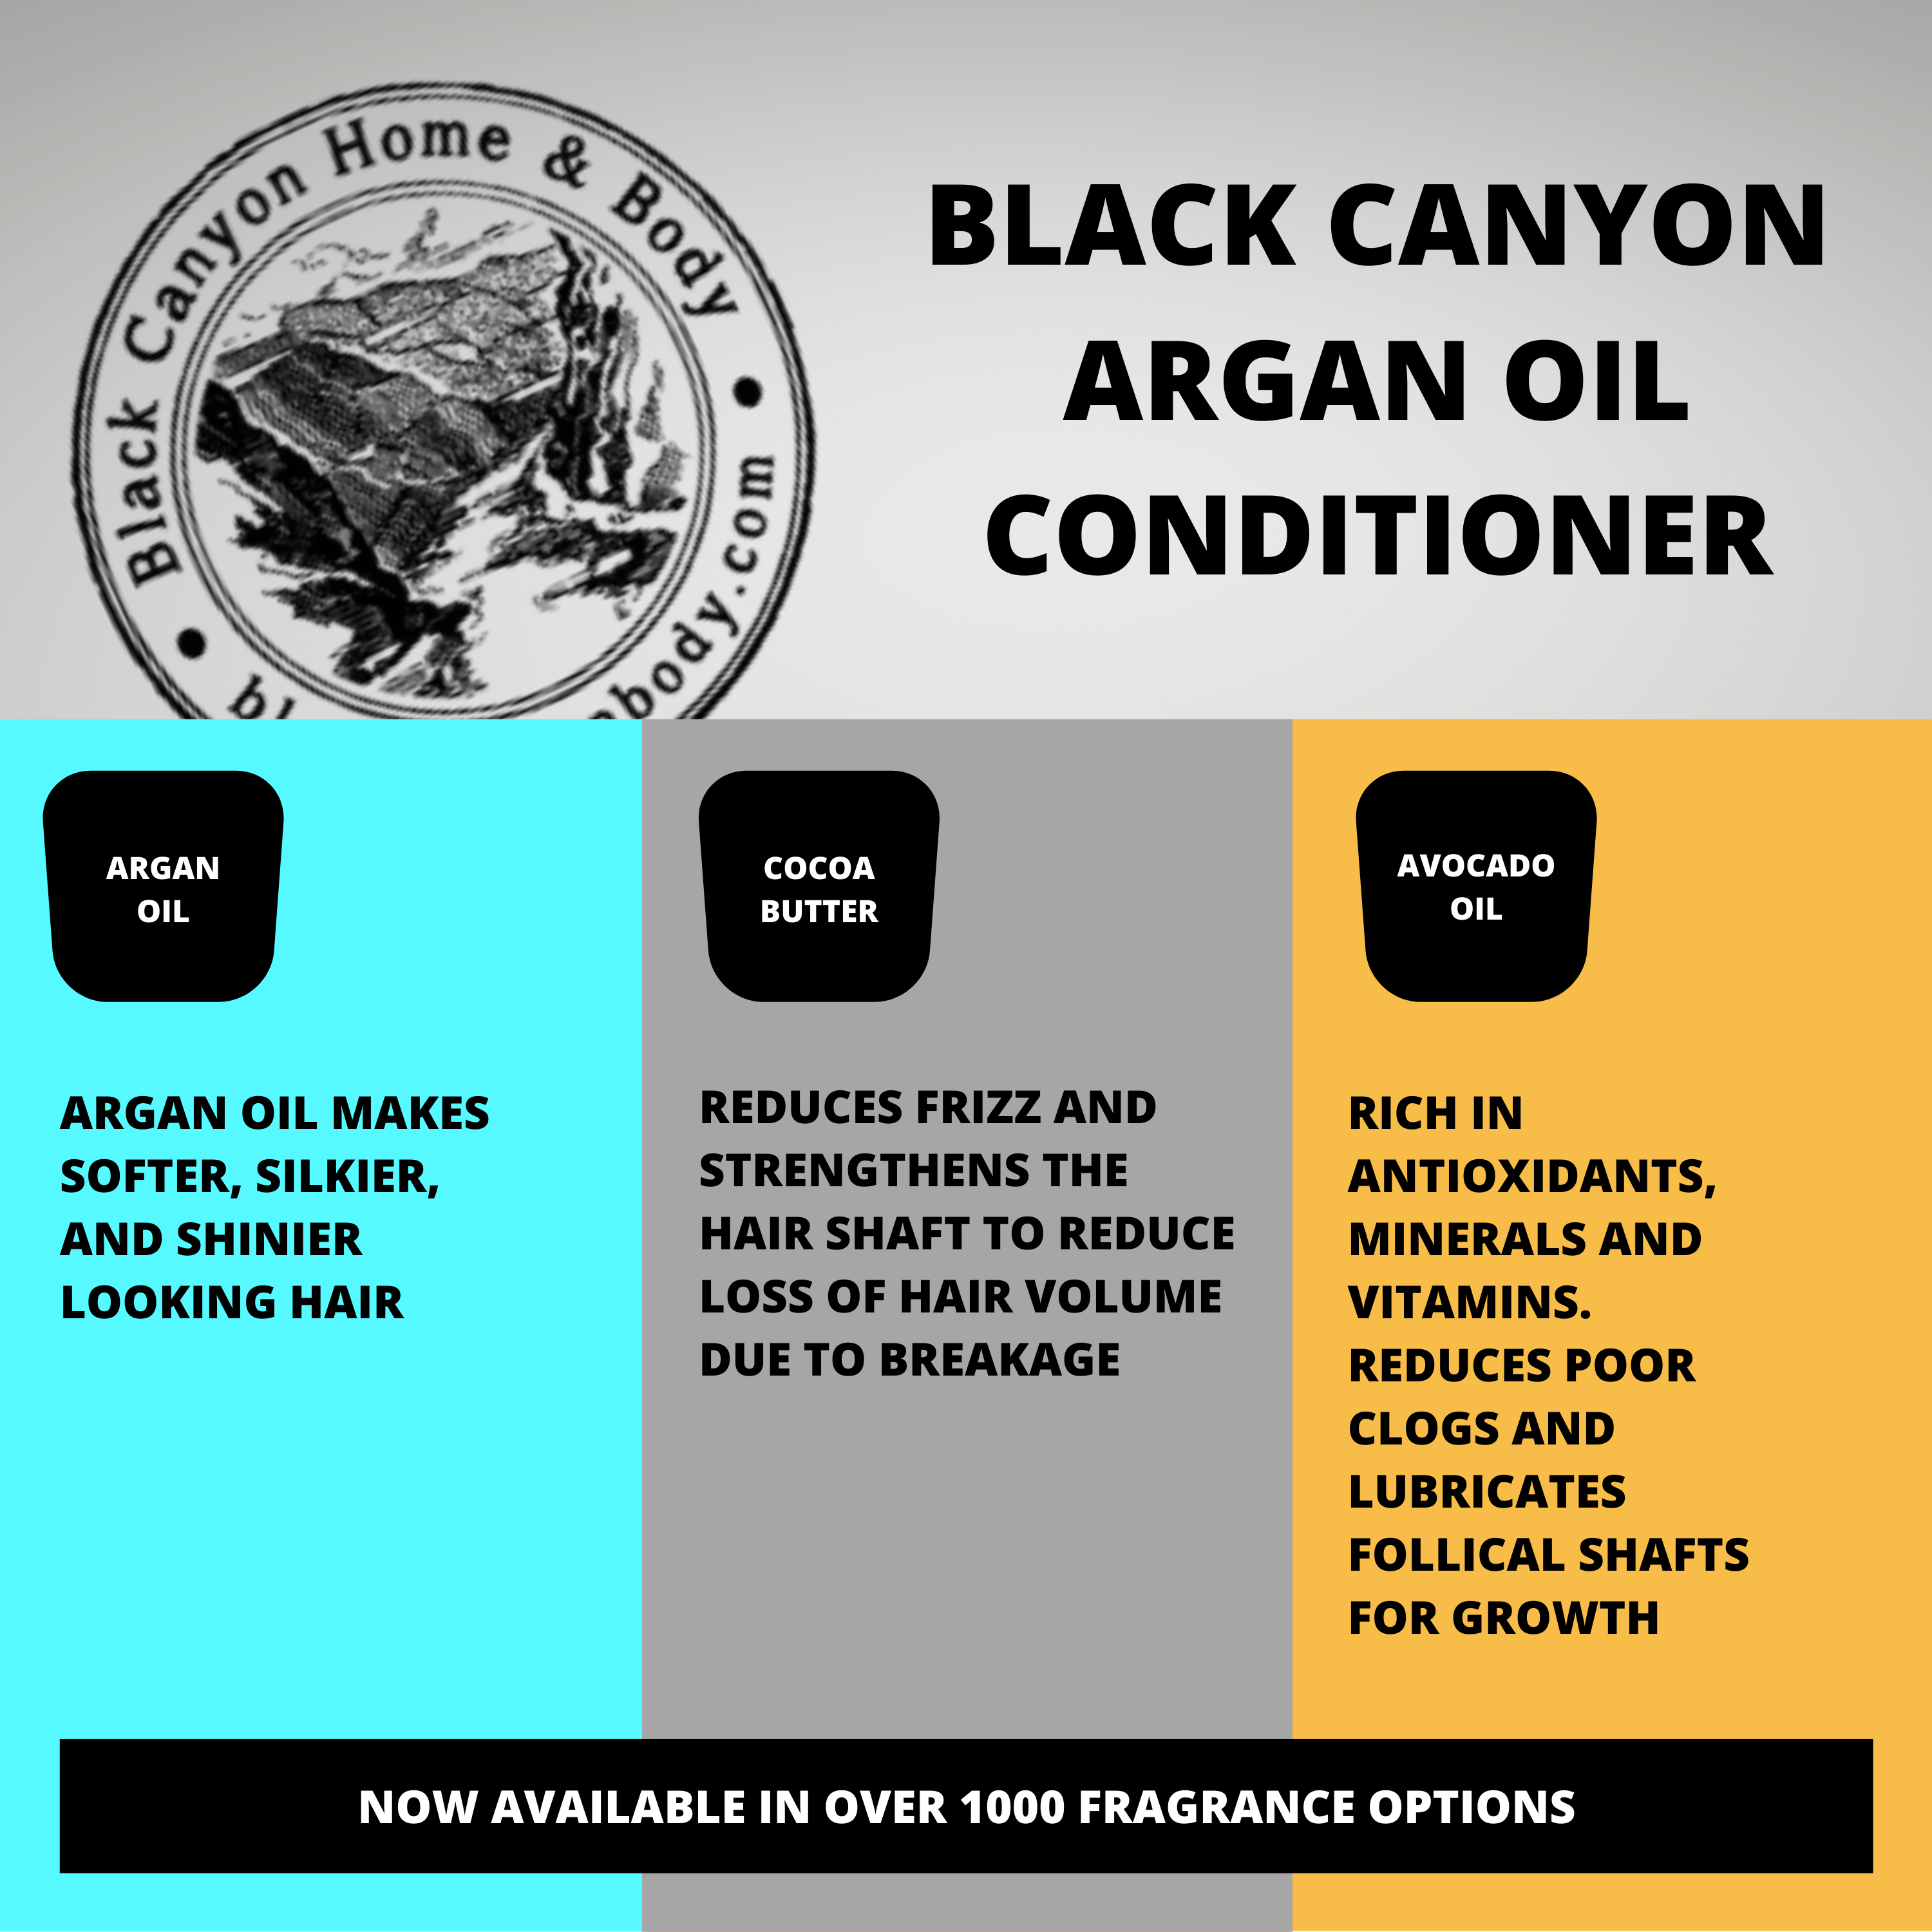 Black Canyon Lemon & Sugared Rose Scented Conditioner with Argan Oil